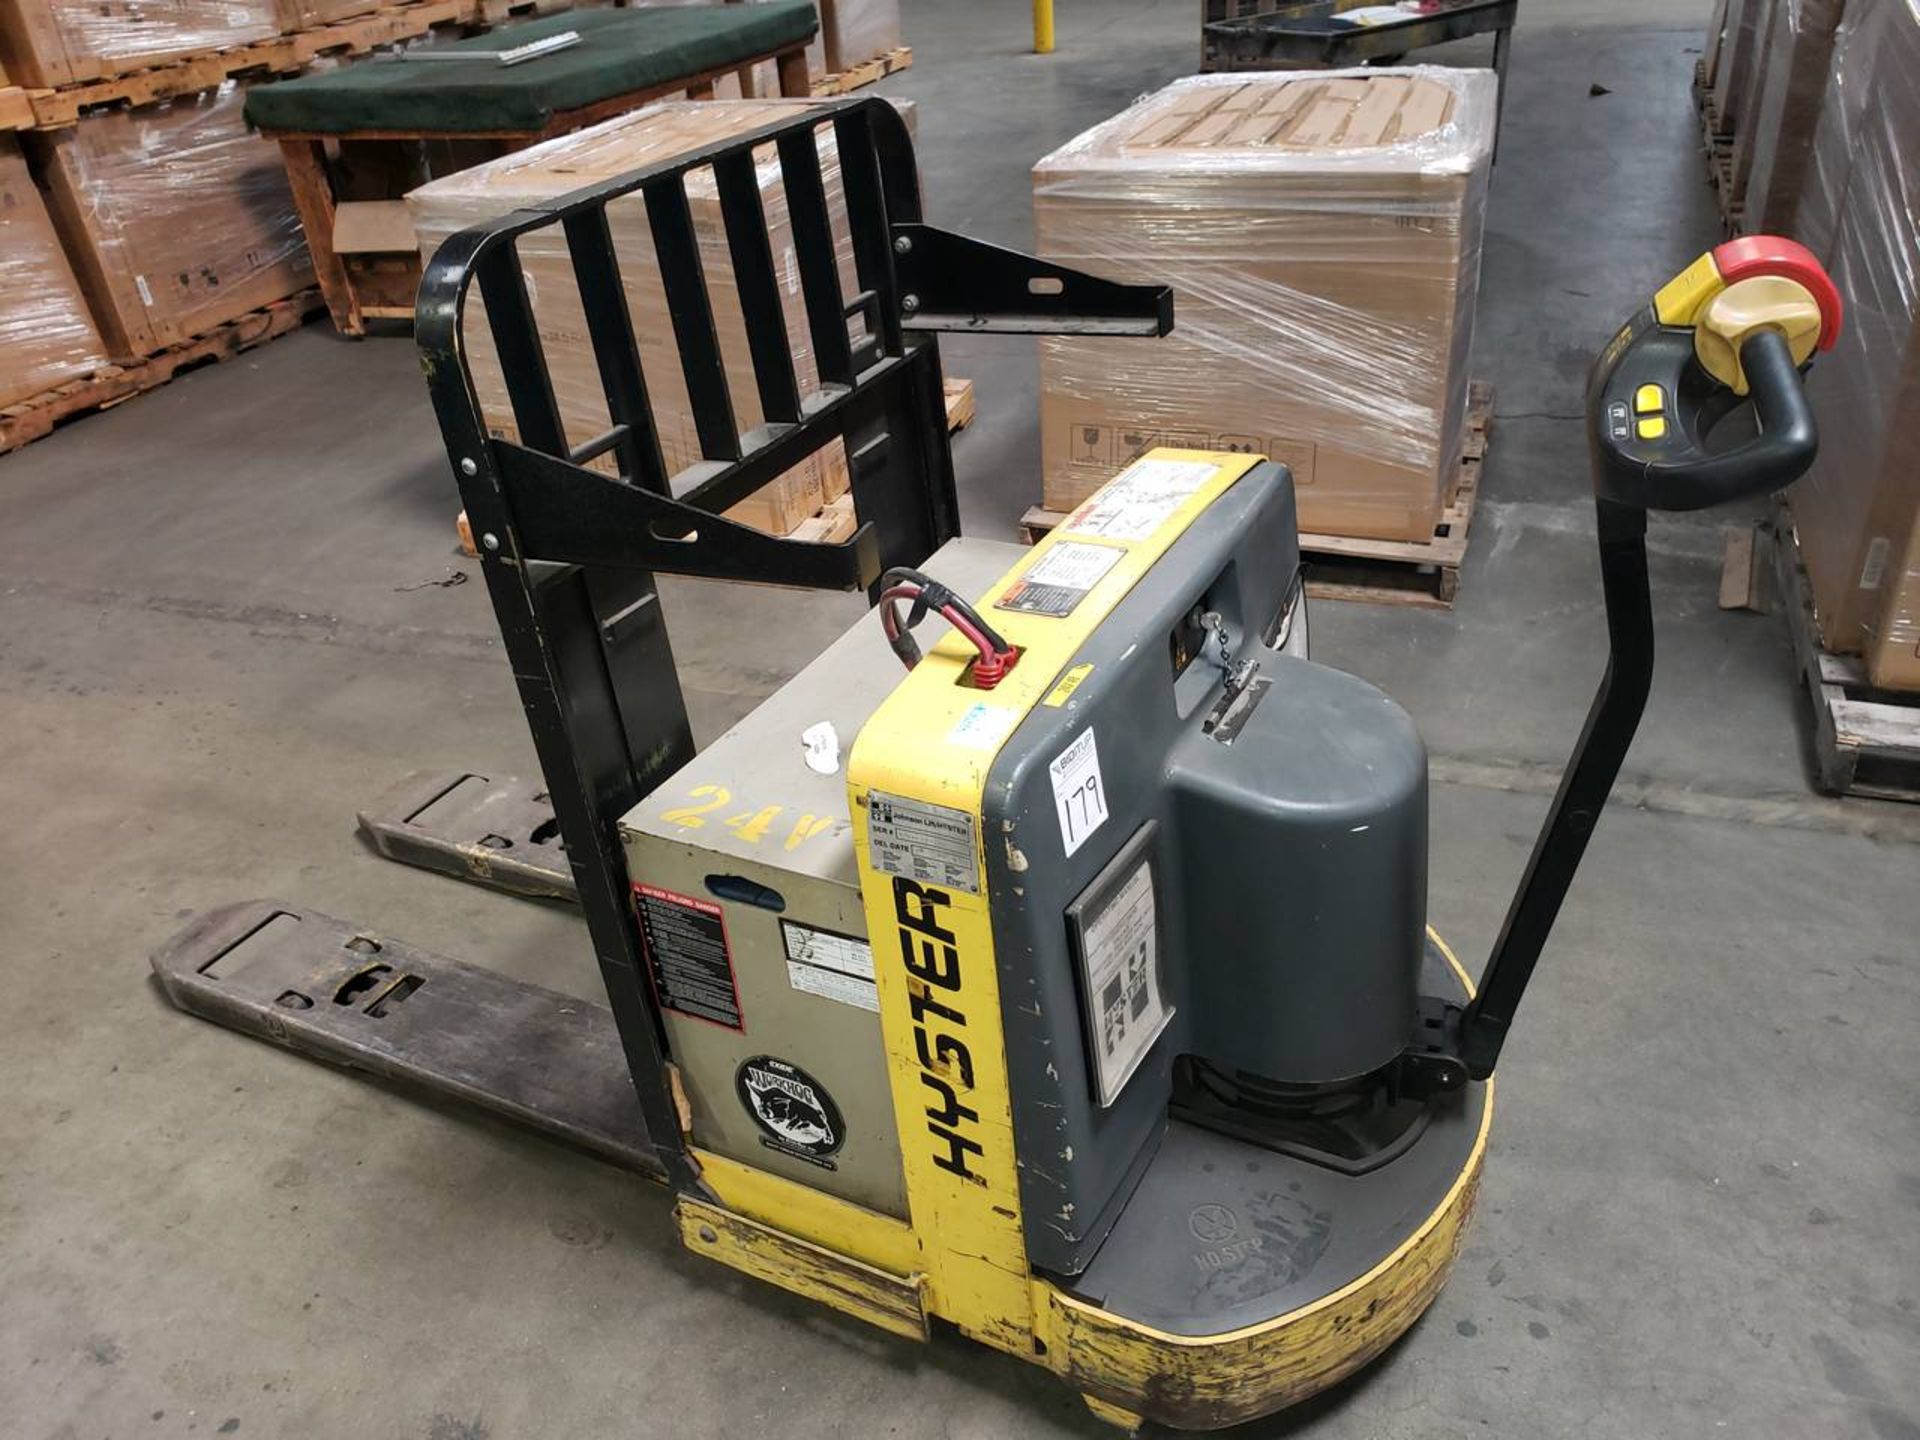 2003 Hyster W80Z 24V Electric Pallet Jack 4 Ton Max Capacity, Hrs- 1,894.7 S/N A234N01636A